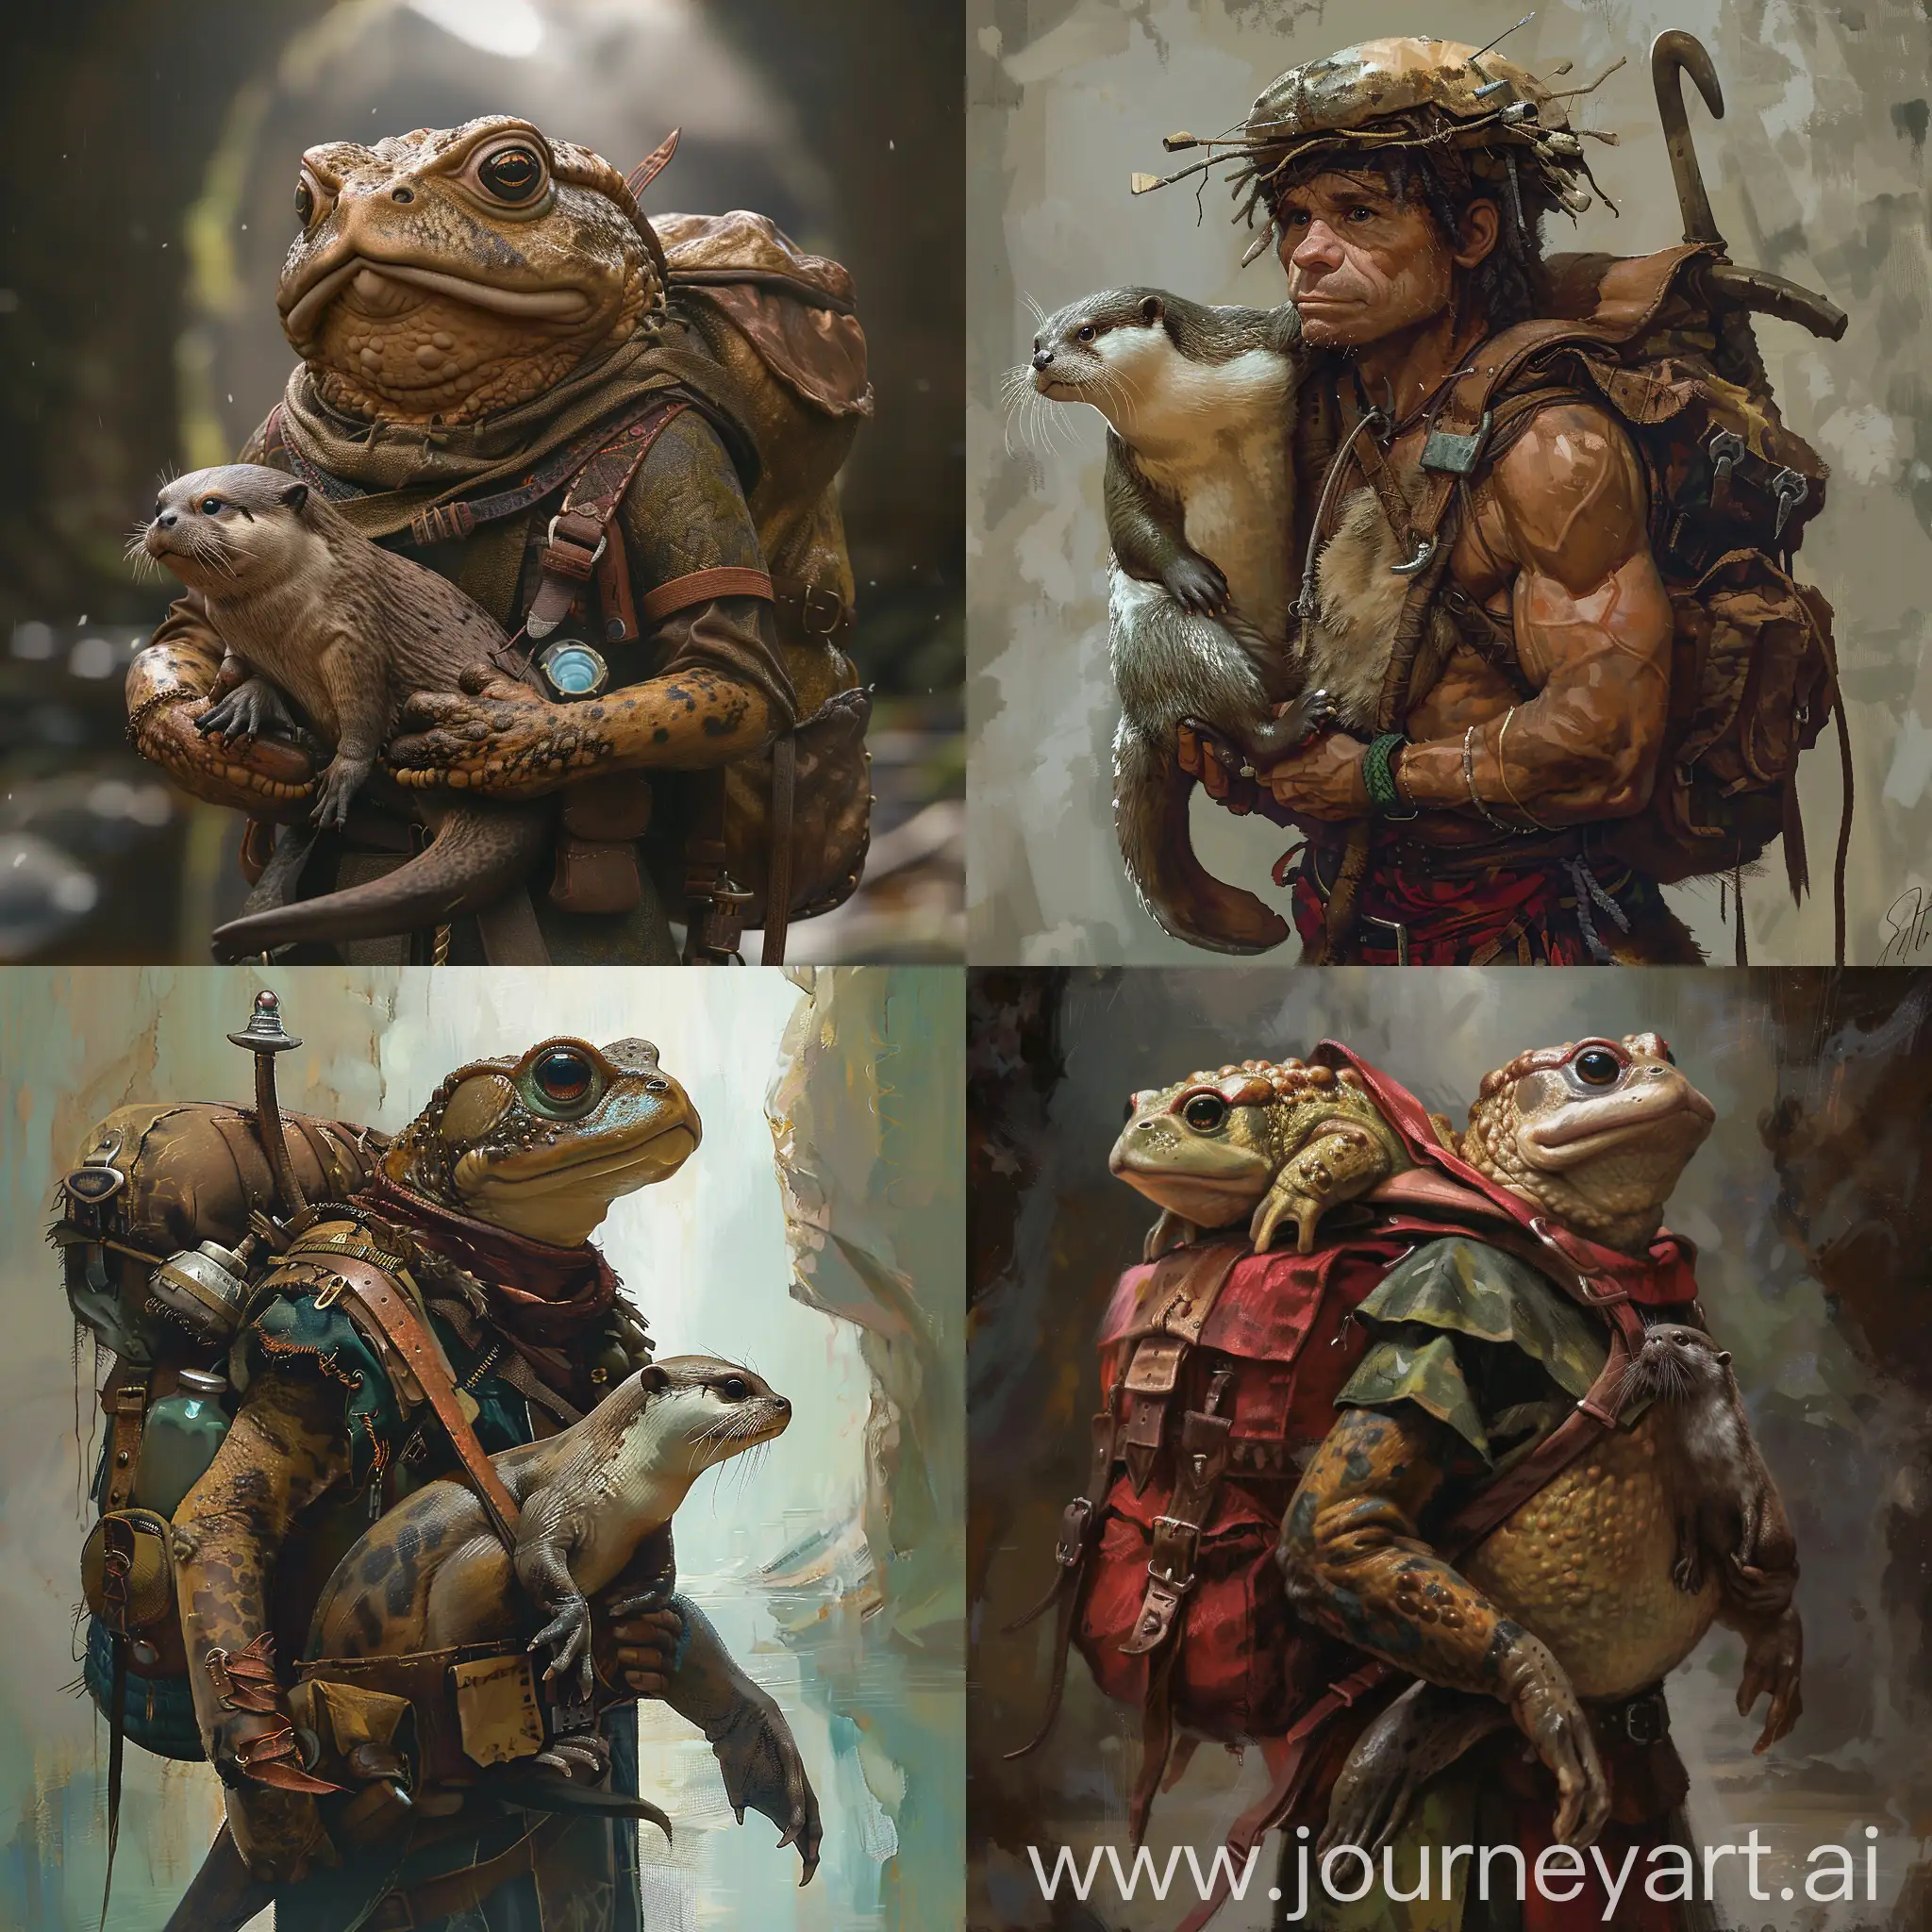 Toad-Warrior-with-Otter-Companion-in-Backpack